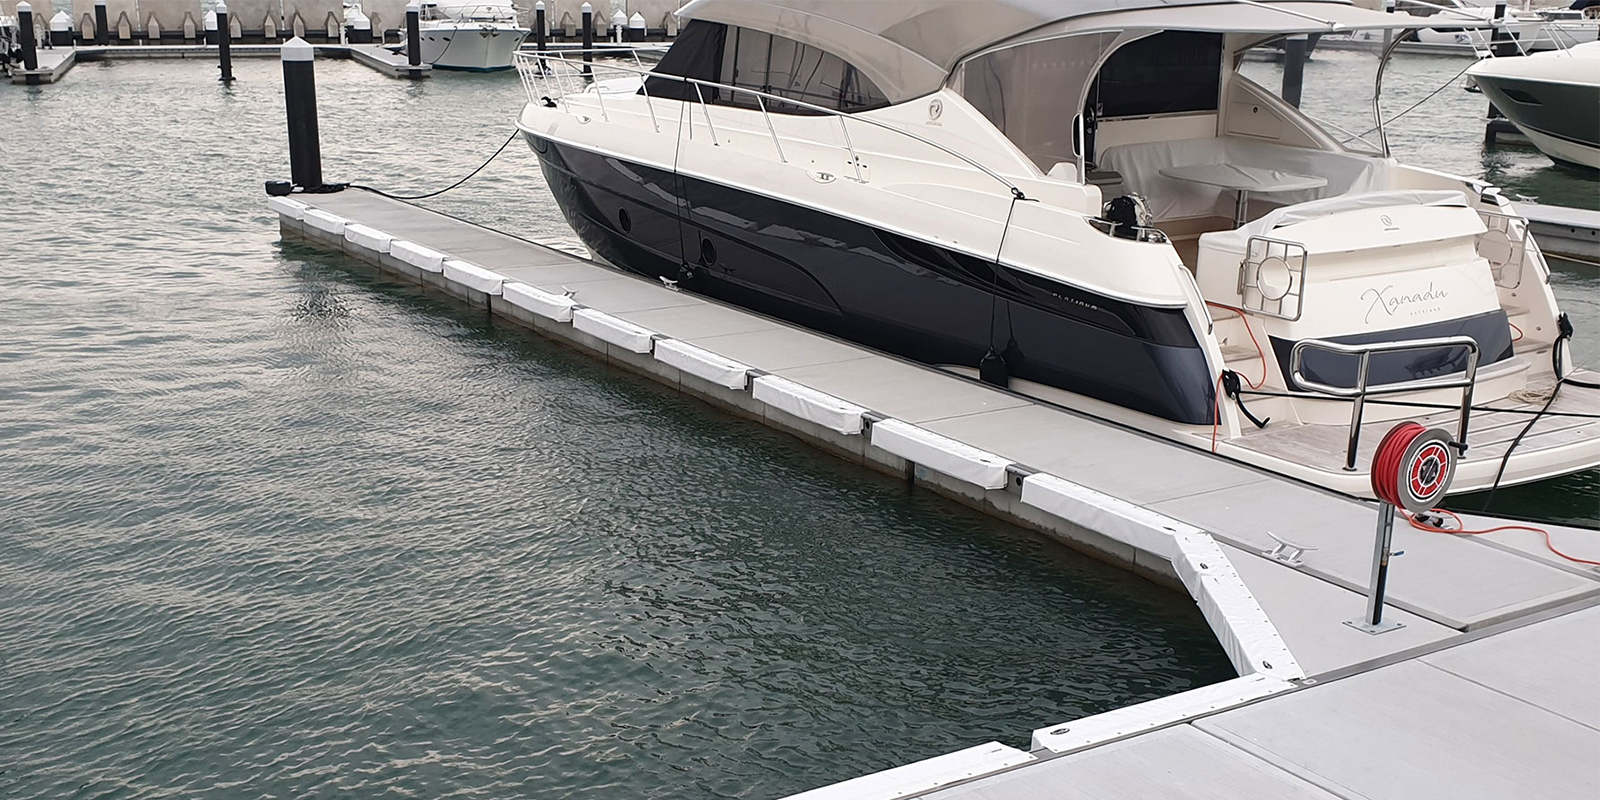 Over the years, marina fenders have developed and improved. Learn about the evolution of marina fenders and what makes a great marina fender today.